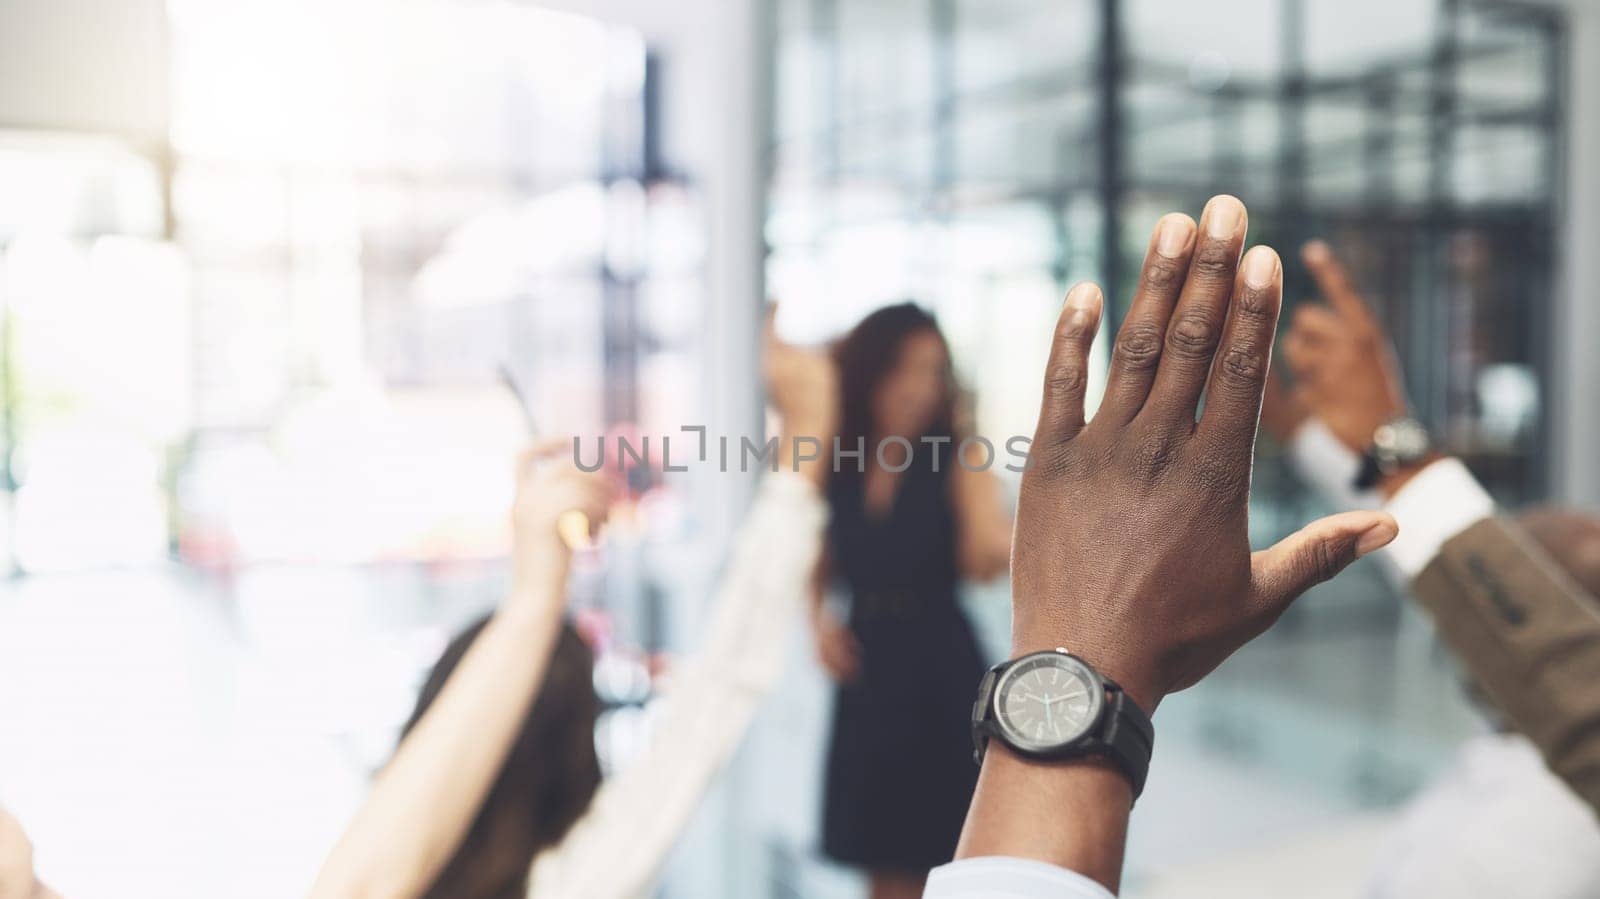 Ask as many questions as you need. Closeup shot of a group of businesspeople raising their hands during a presentation in an office